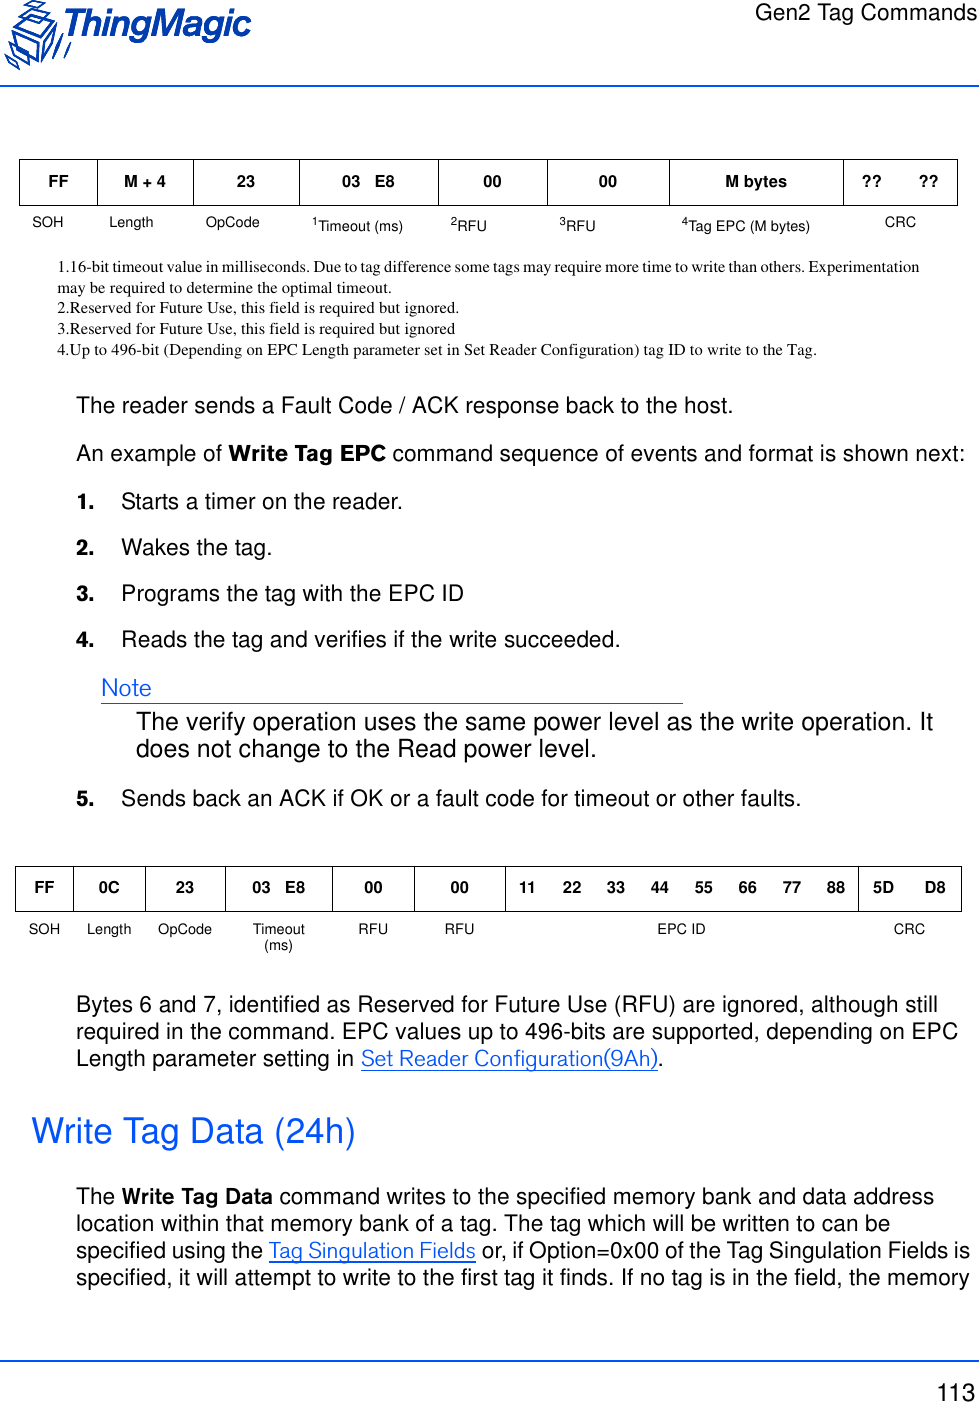 Gen2 Tag Commands113The reader sends a Fault Code / ACK response back to the host.An example of Write Tag EPC command sequence of events and format is shown next:1.    Starts a timer on the reader.2.    Wakes the tag.3.    Programs the tag with the EPC ID 4.    Reads the tag and verifies if the write succeeded.NoteThe verify operation uses the same power level as the write operation. It does not change to the Read power level.5.    Sends back an ACK if OK or a fault code for timeout or other faults.Bytes 6 and 7, identified as Reserved for Future Use (RFU) are ignored, although still required in the command. EPC values up to 496-bits are supported, depending on EPC Length parameter setting in Set Reader Configuration(9Ah).Write Tag Data (24h)The Write Tag Data command writes to the specified memory bank and data address location within that memory bank of a tag. The tag which will be written to can be specified using the Tag Singulation Fields or, if Option=0x00 of the Tag Singulation Fields is specified, it will attempt to write to the first tag it finds. If no tag is in the field, the memory FF M + 4 23 03   E8 00 00 M bytes ?? ??SOH Length OpCode 1Timeout (ms)1.16-bit timeout value in milliseconds. Due to tag difference some tags may require more time to write than others. Experimentationmay be required to determine the optimal timeout.2RFU2.Reserved for Future Use, this field is required but ignored.3RFU3.Reserved for Future Use, this field is required but ignored4Tag EPC (M bytes)4.Up to 496-bit (Depending on EPC Length parameter set in Set Reader Configuration) tag ID to write to the Tag.CRCFF 0C 23 03   E8 00 00 11 22 33 44 55 66 77 88 5D D8SOH Length OpCode Timeout (ms) RFU RFU EPC ID CRC